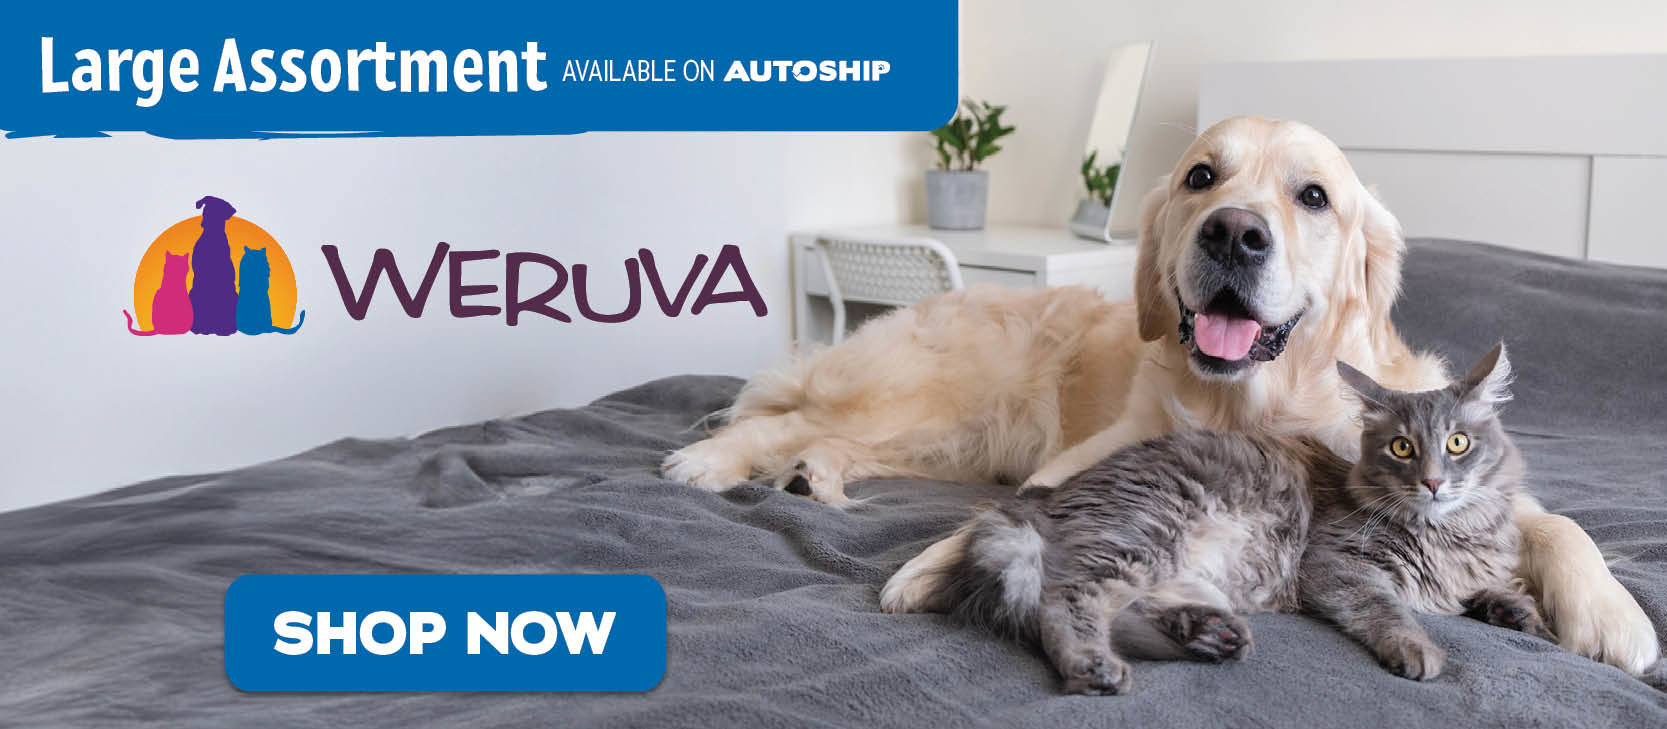 Weruva - A large assortment available with autoship